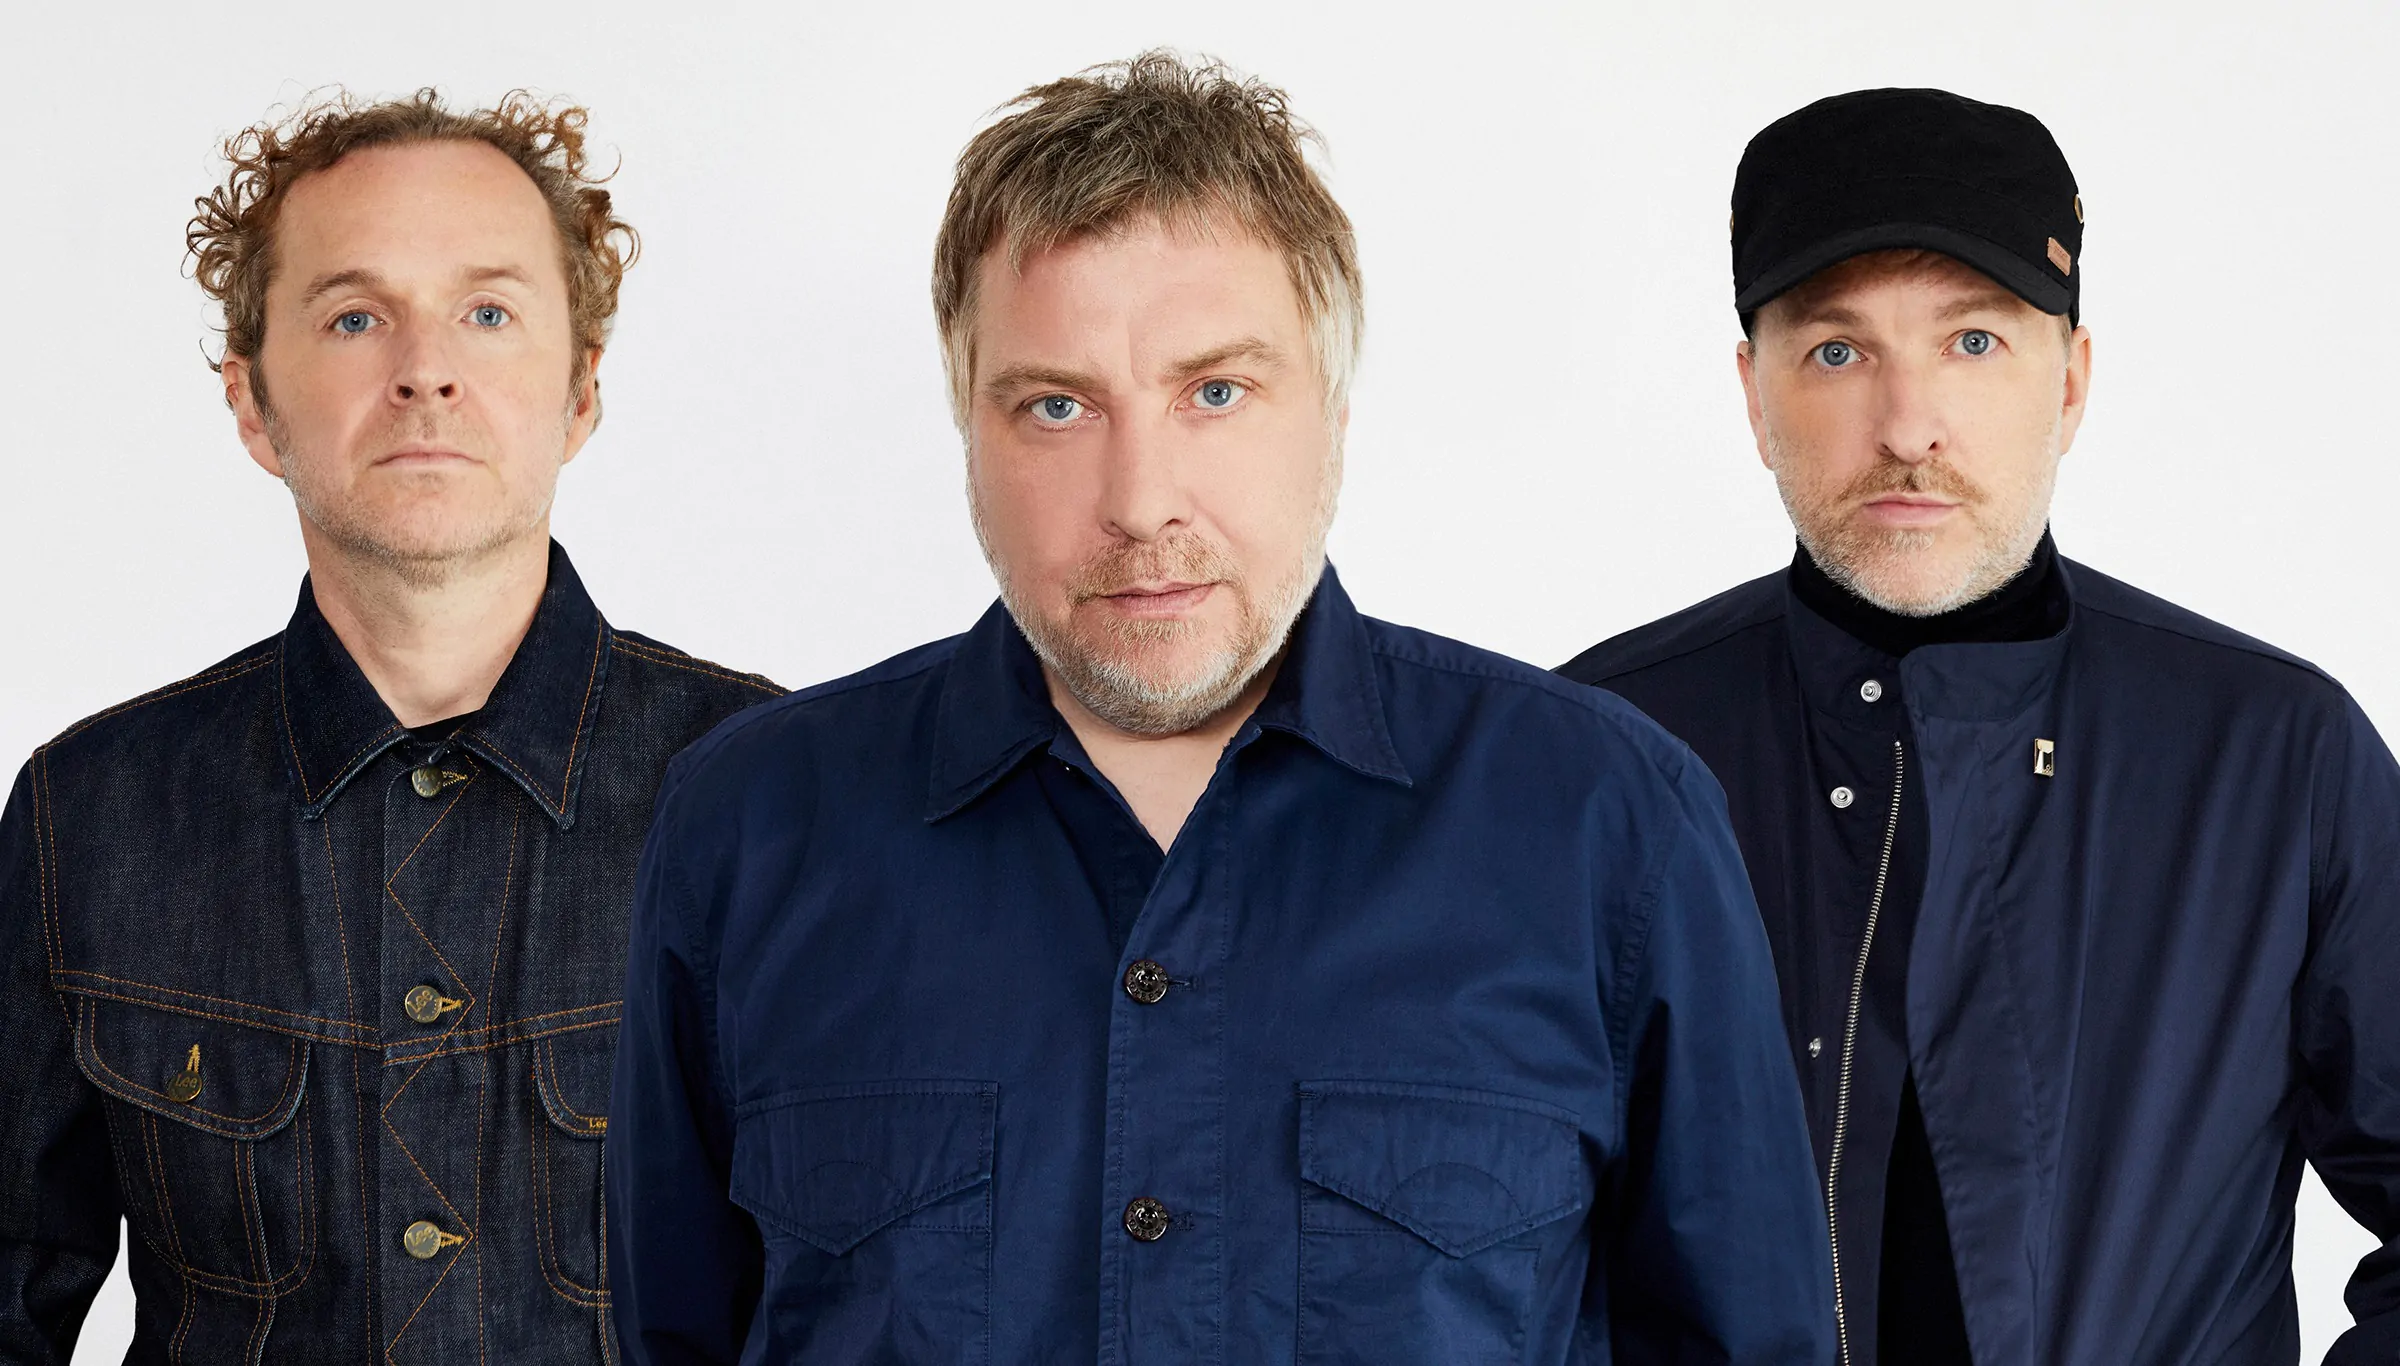 DOVES new music leaks… but fans must play it themselves